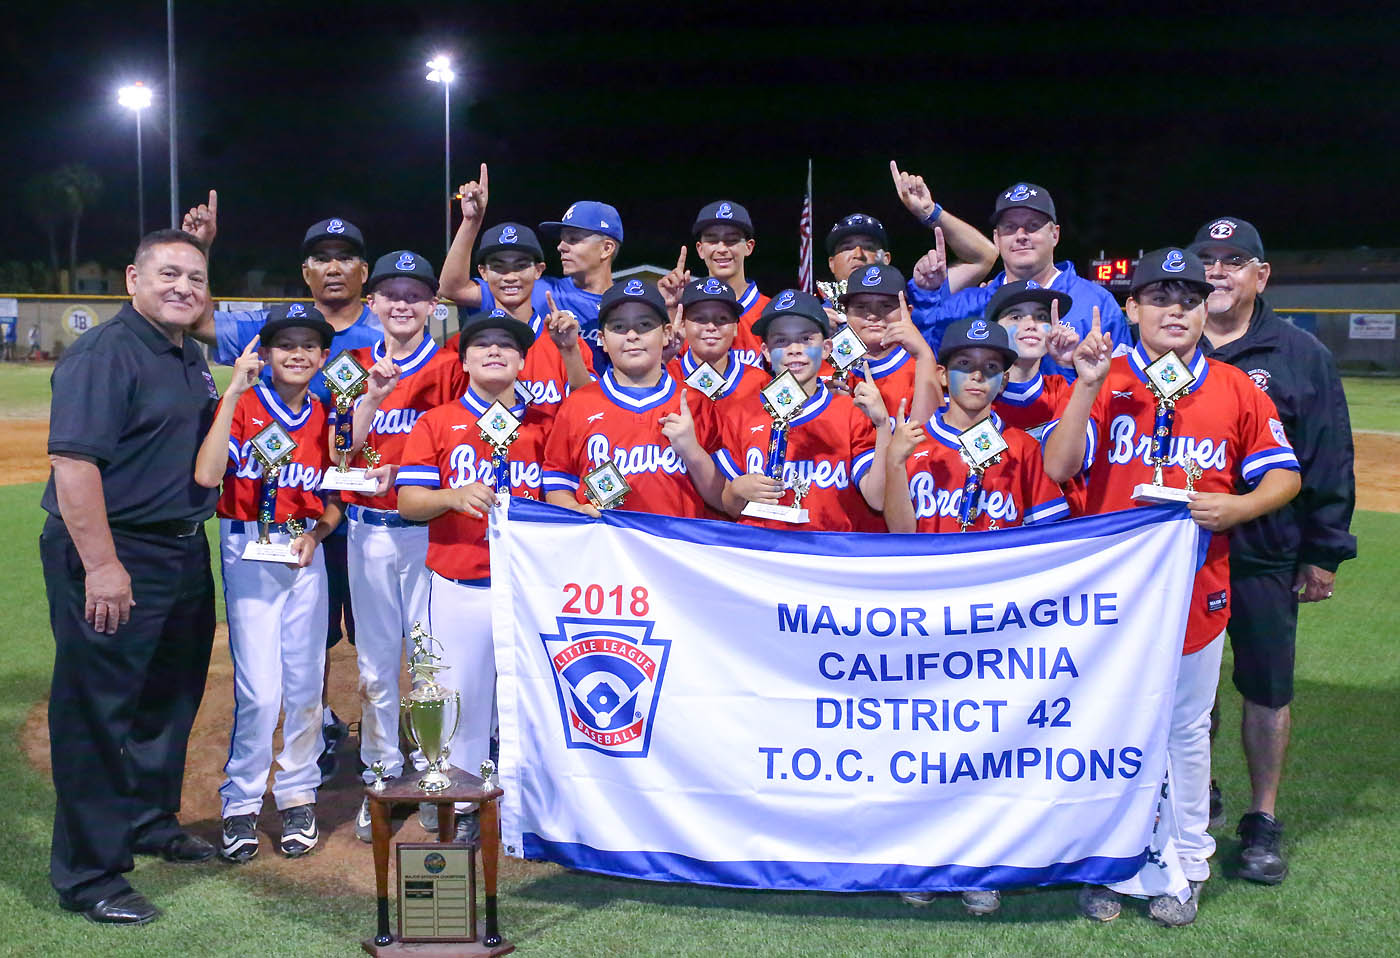 Eastlake Braves claim District 42 Majors Division TOC title | The Star News